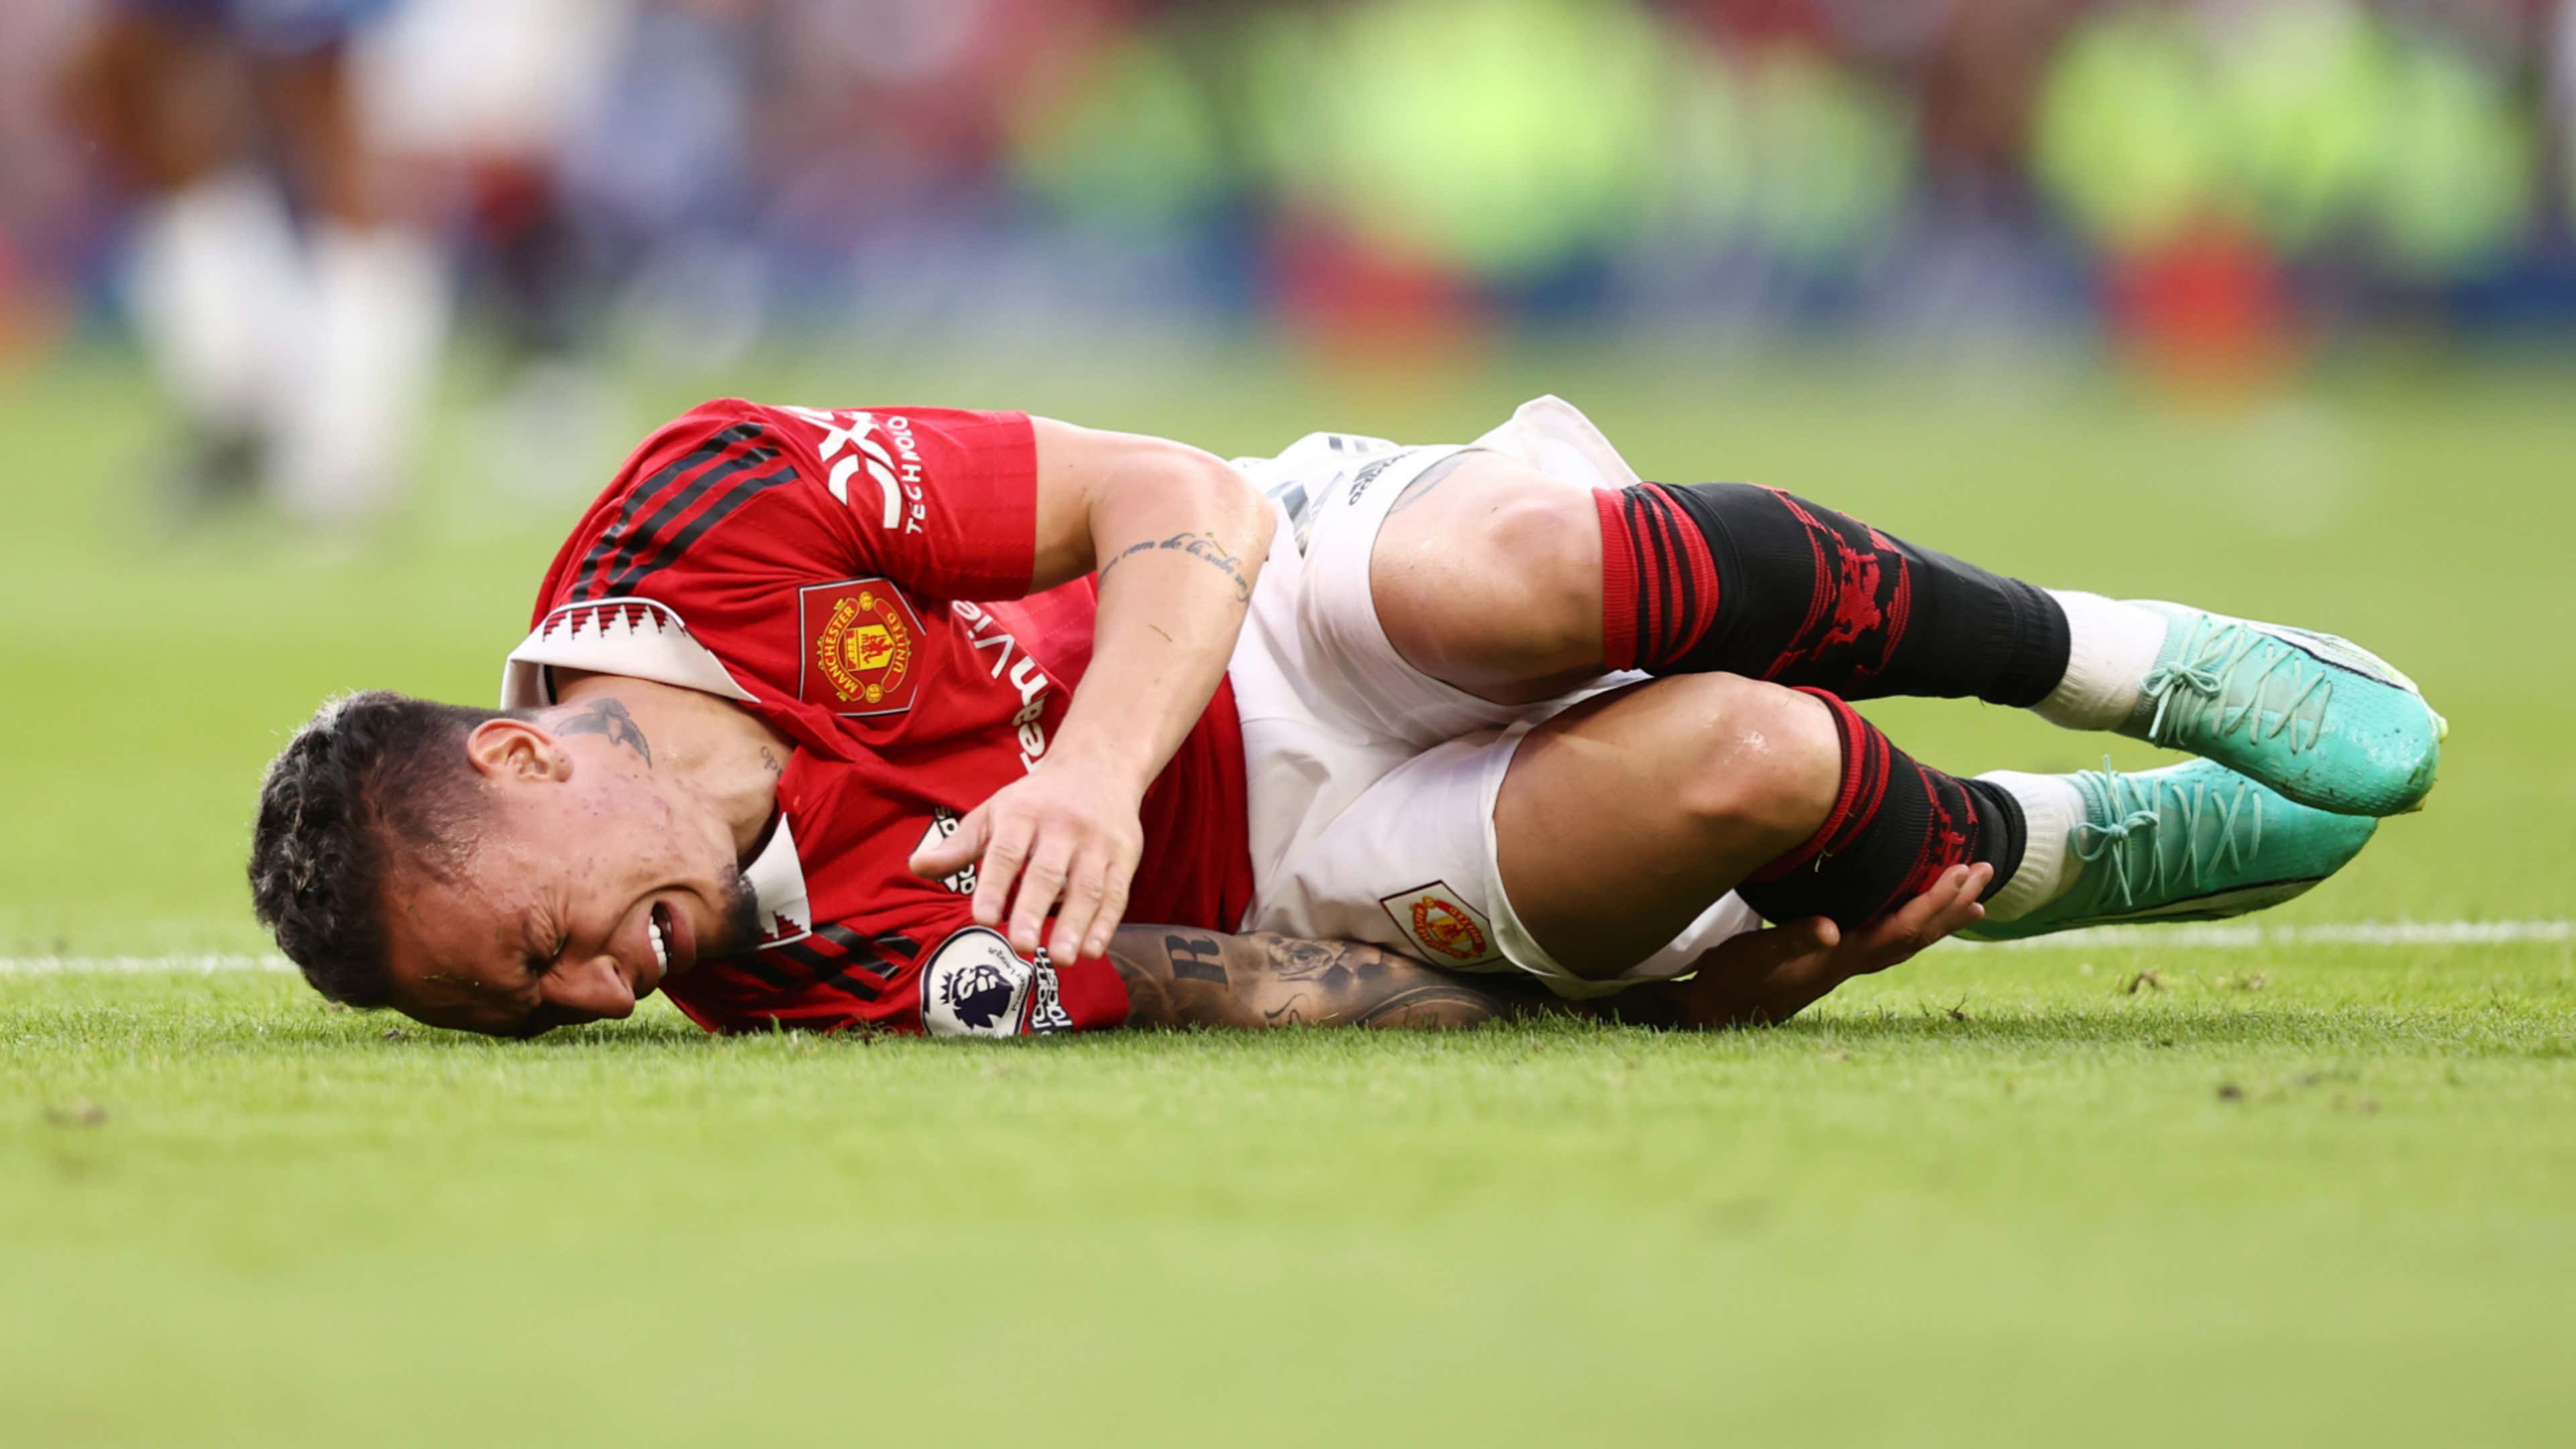 Man Utd Facing Fa Cup Final Injury Crisis As Erik Ten Hag Confirms  'Serious' Issue For Antony As Red Devils Also Sweating On Luke Shaw Knock  Ahead Of Man City Showdown |